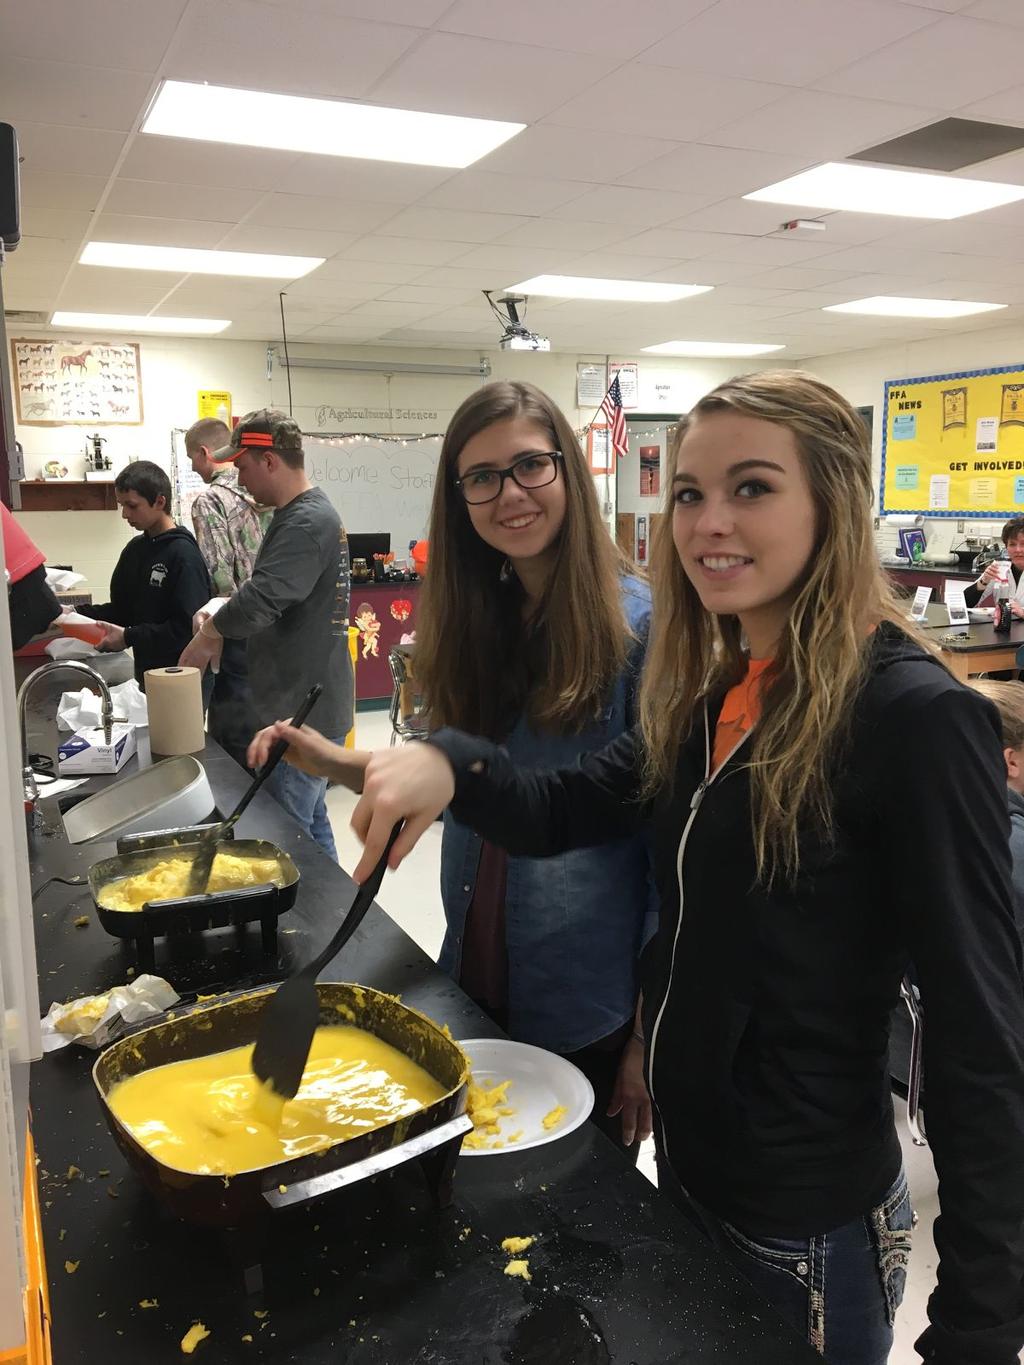 Easter Seals charity fundraiser: FFA chapters in our area were asked to support an Easter Seals